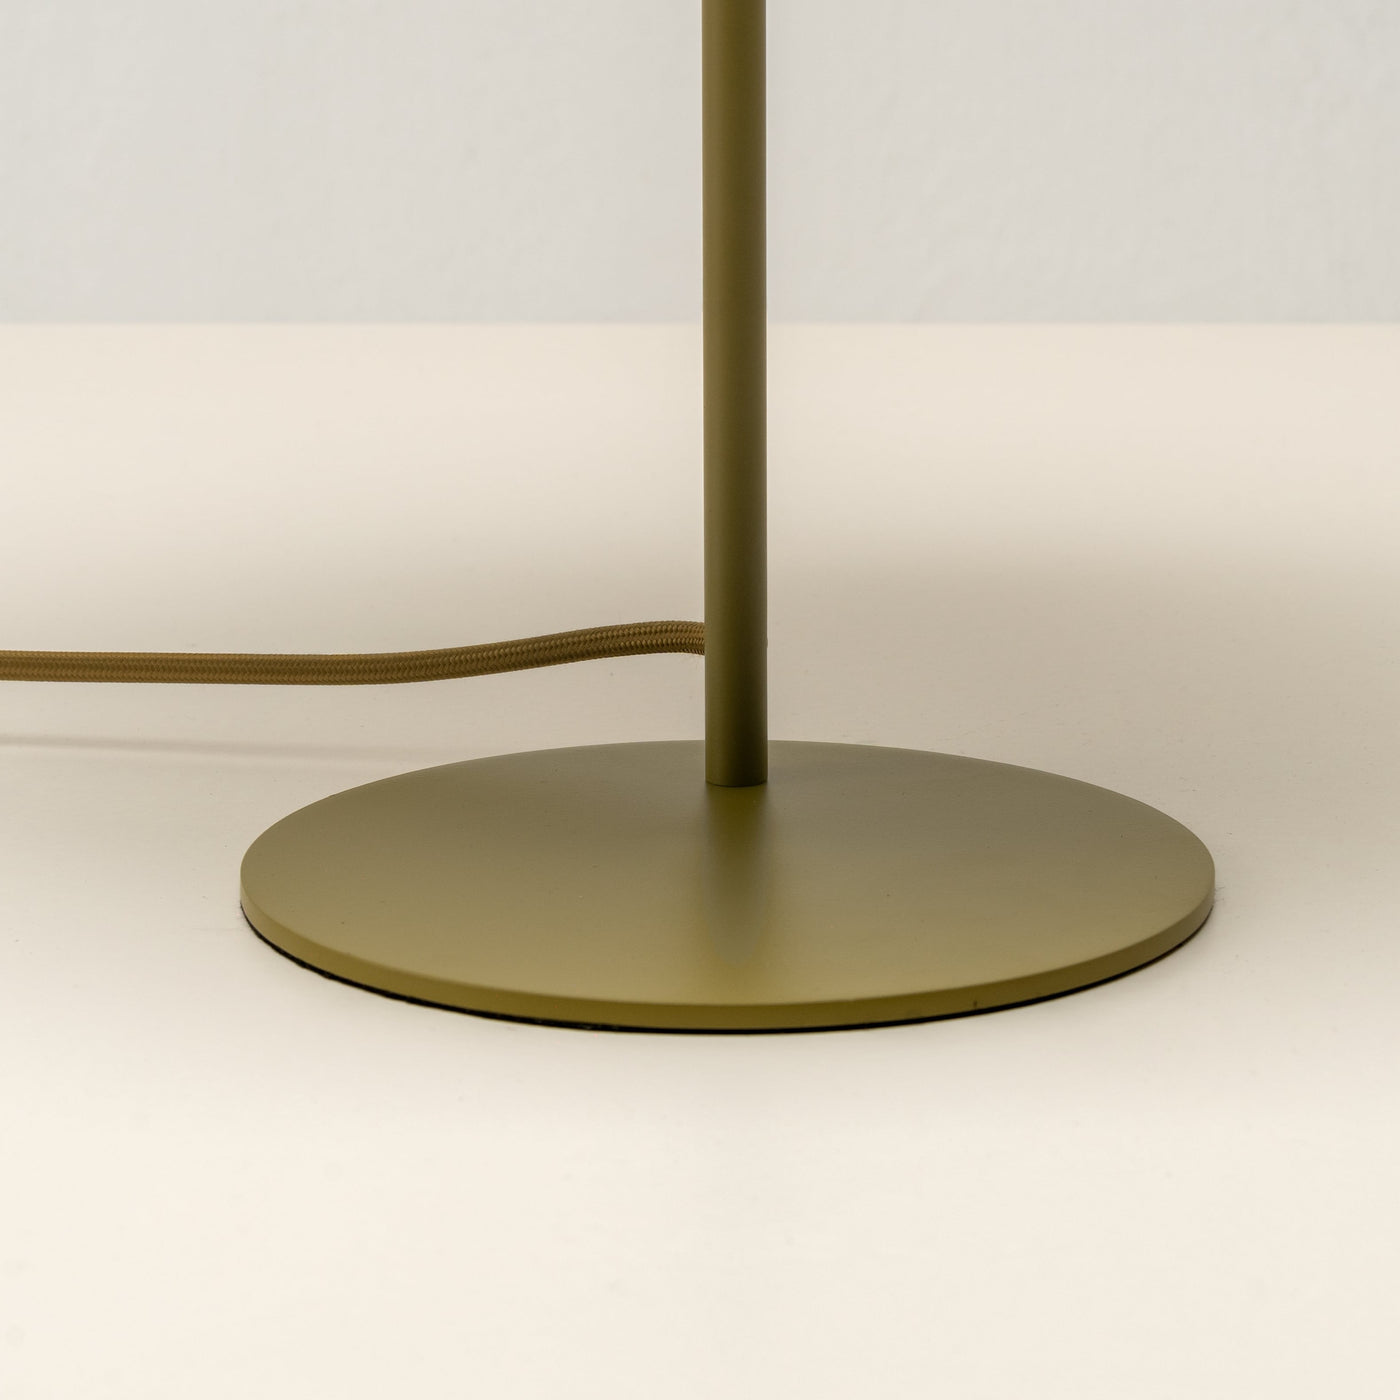 Houseof Pleat Table Lamp designed by Emma Gurner. Available from someday designs.